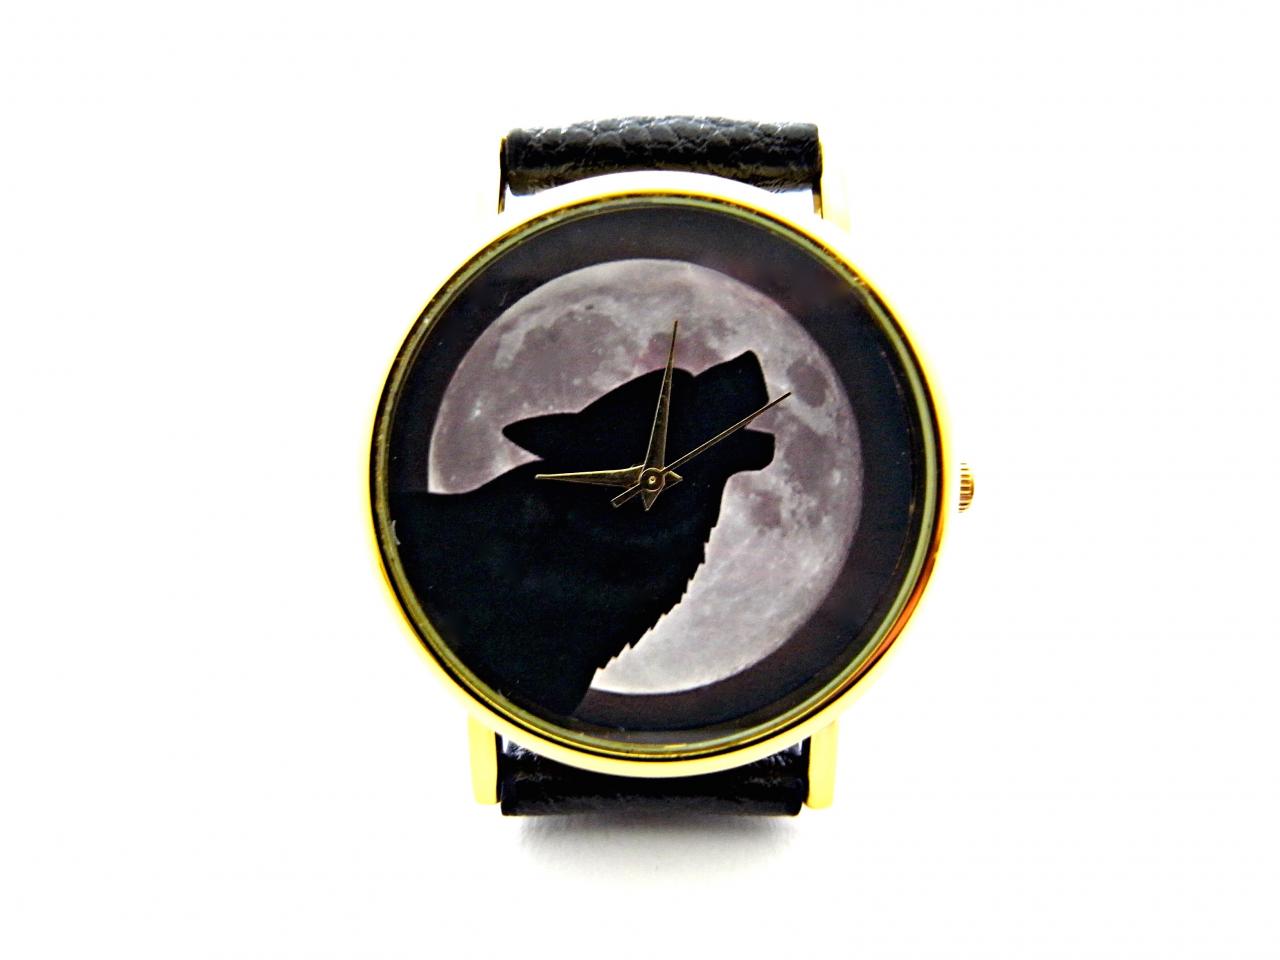 Wolf Leather Wrist Watches, Woman Man Lady Unisex Watch, Genuine Leather Handmade Unique Watch #25